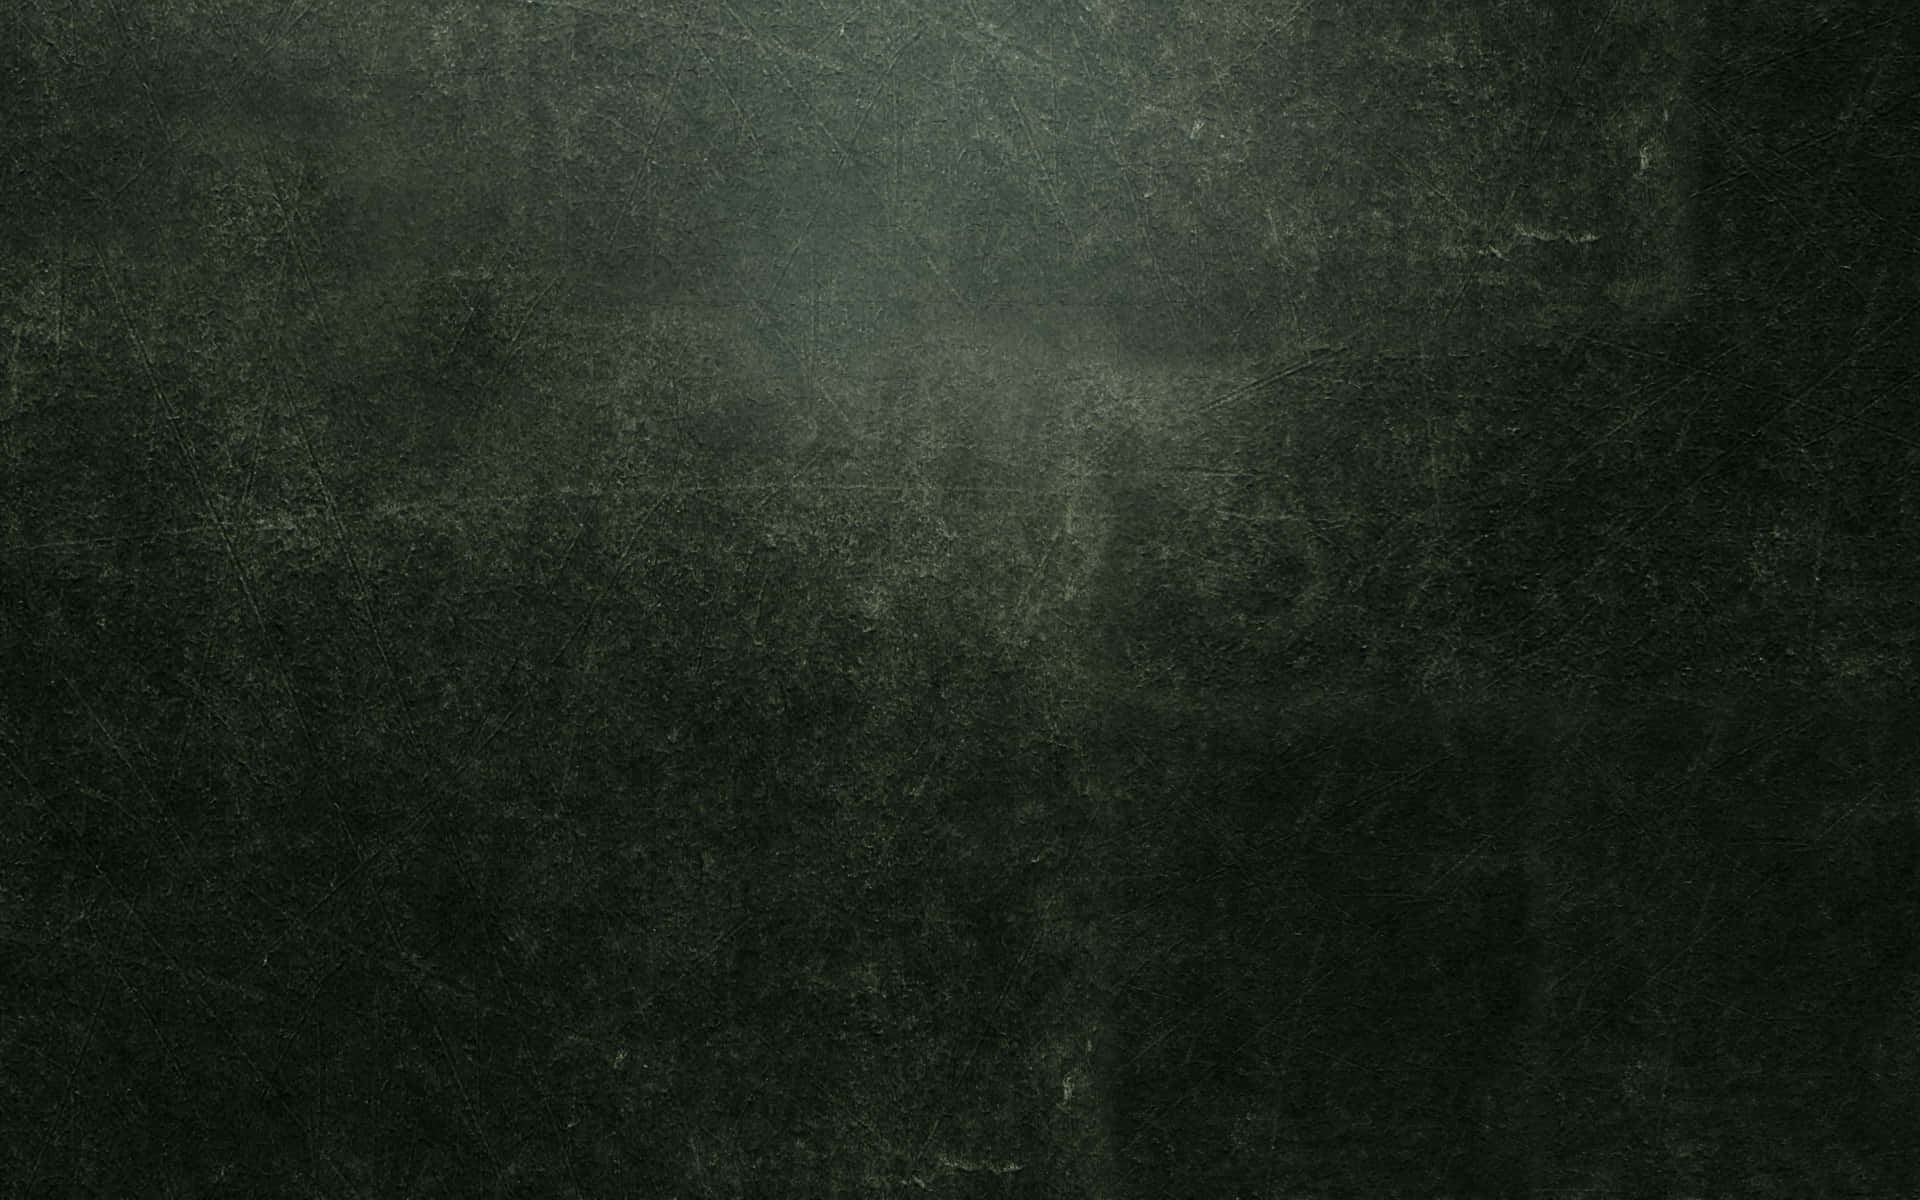 Bold and Eye-Catching Black Grunge Texture Wallpaper